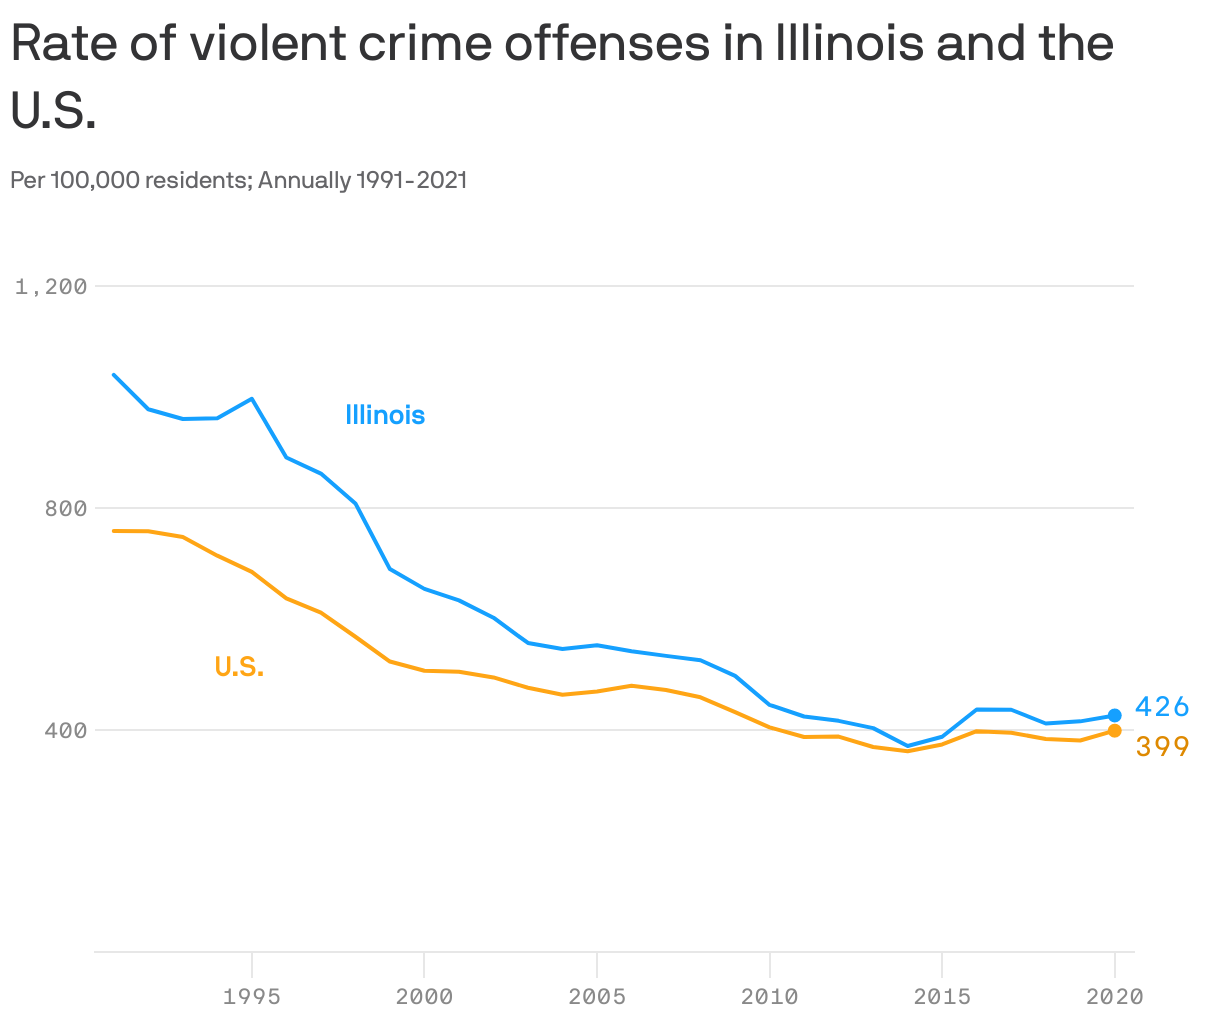 Rate of violent crime offenses in Illinois and the U.S.